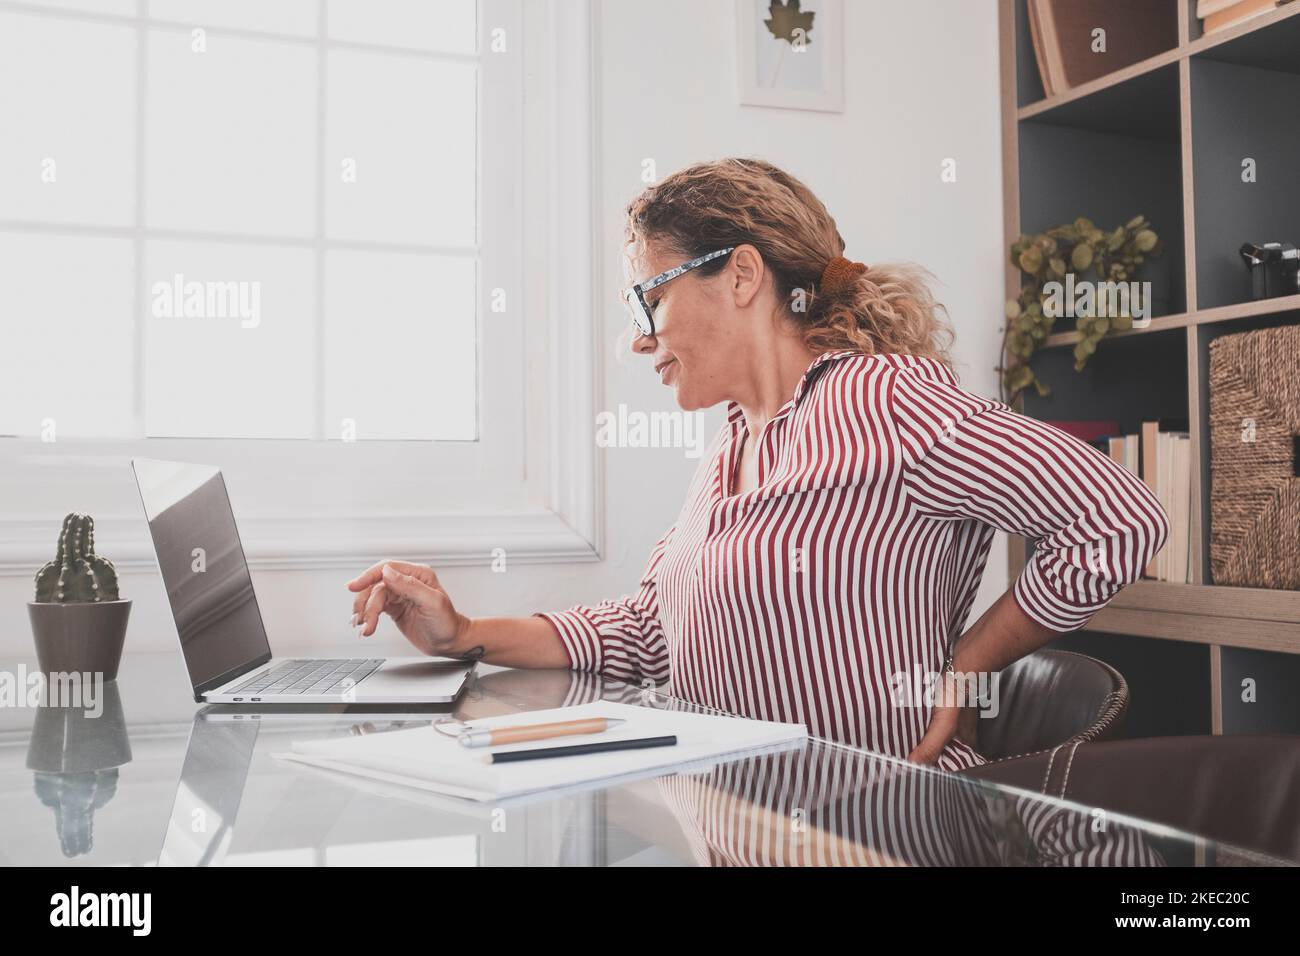 Caucasian woman touching her back for stress pain and disease caused by work posture. Businesswoman suffering with back ache while sitting on office chair and working on laptop. Female executive with lower back pain Stock Photo